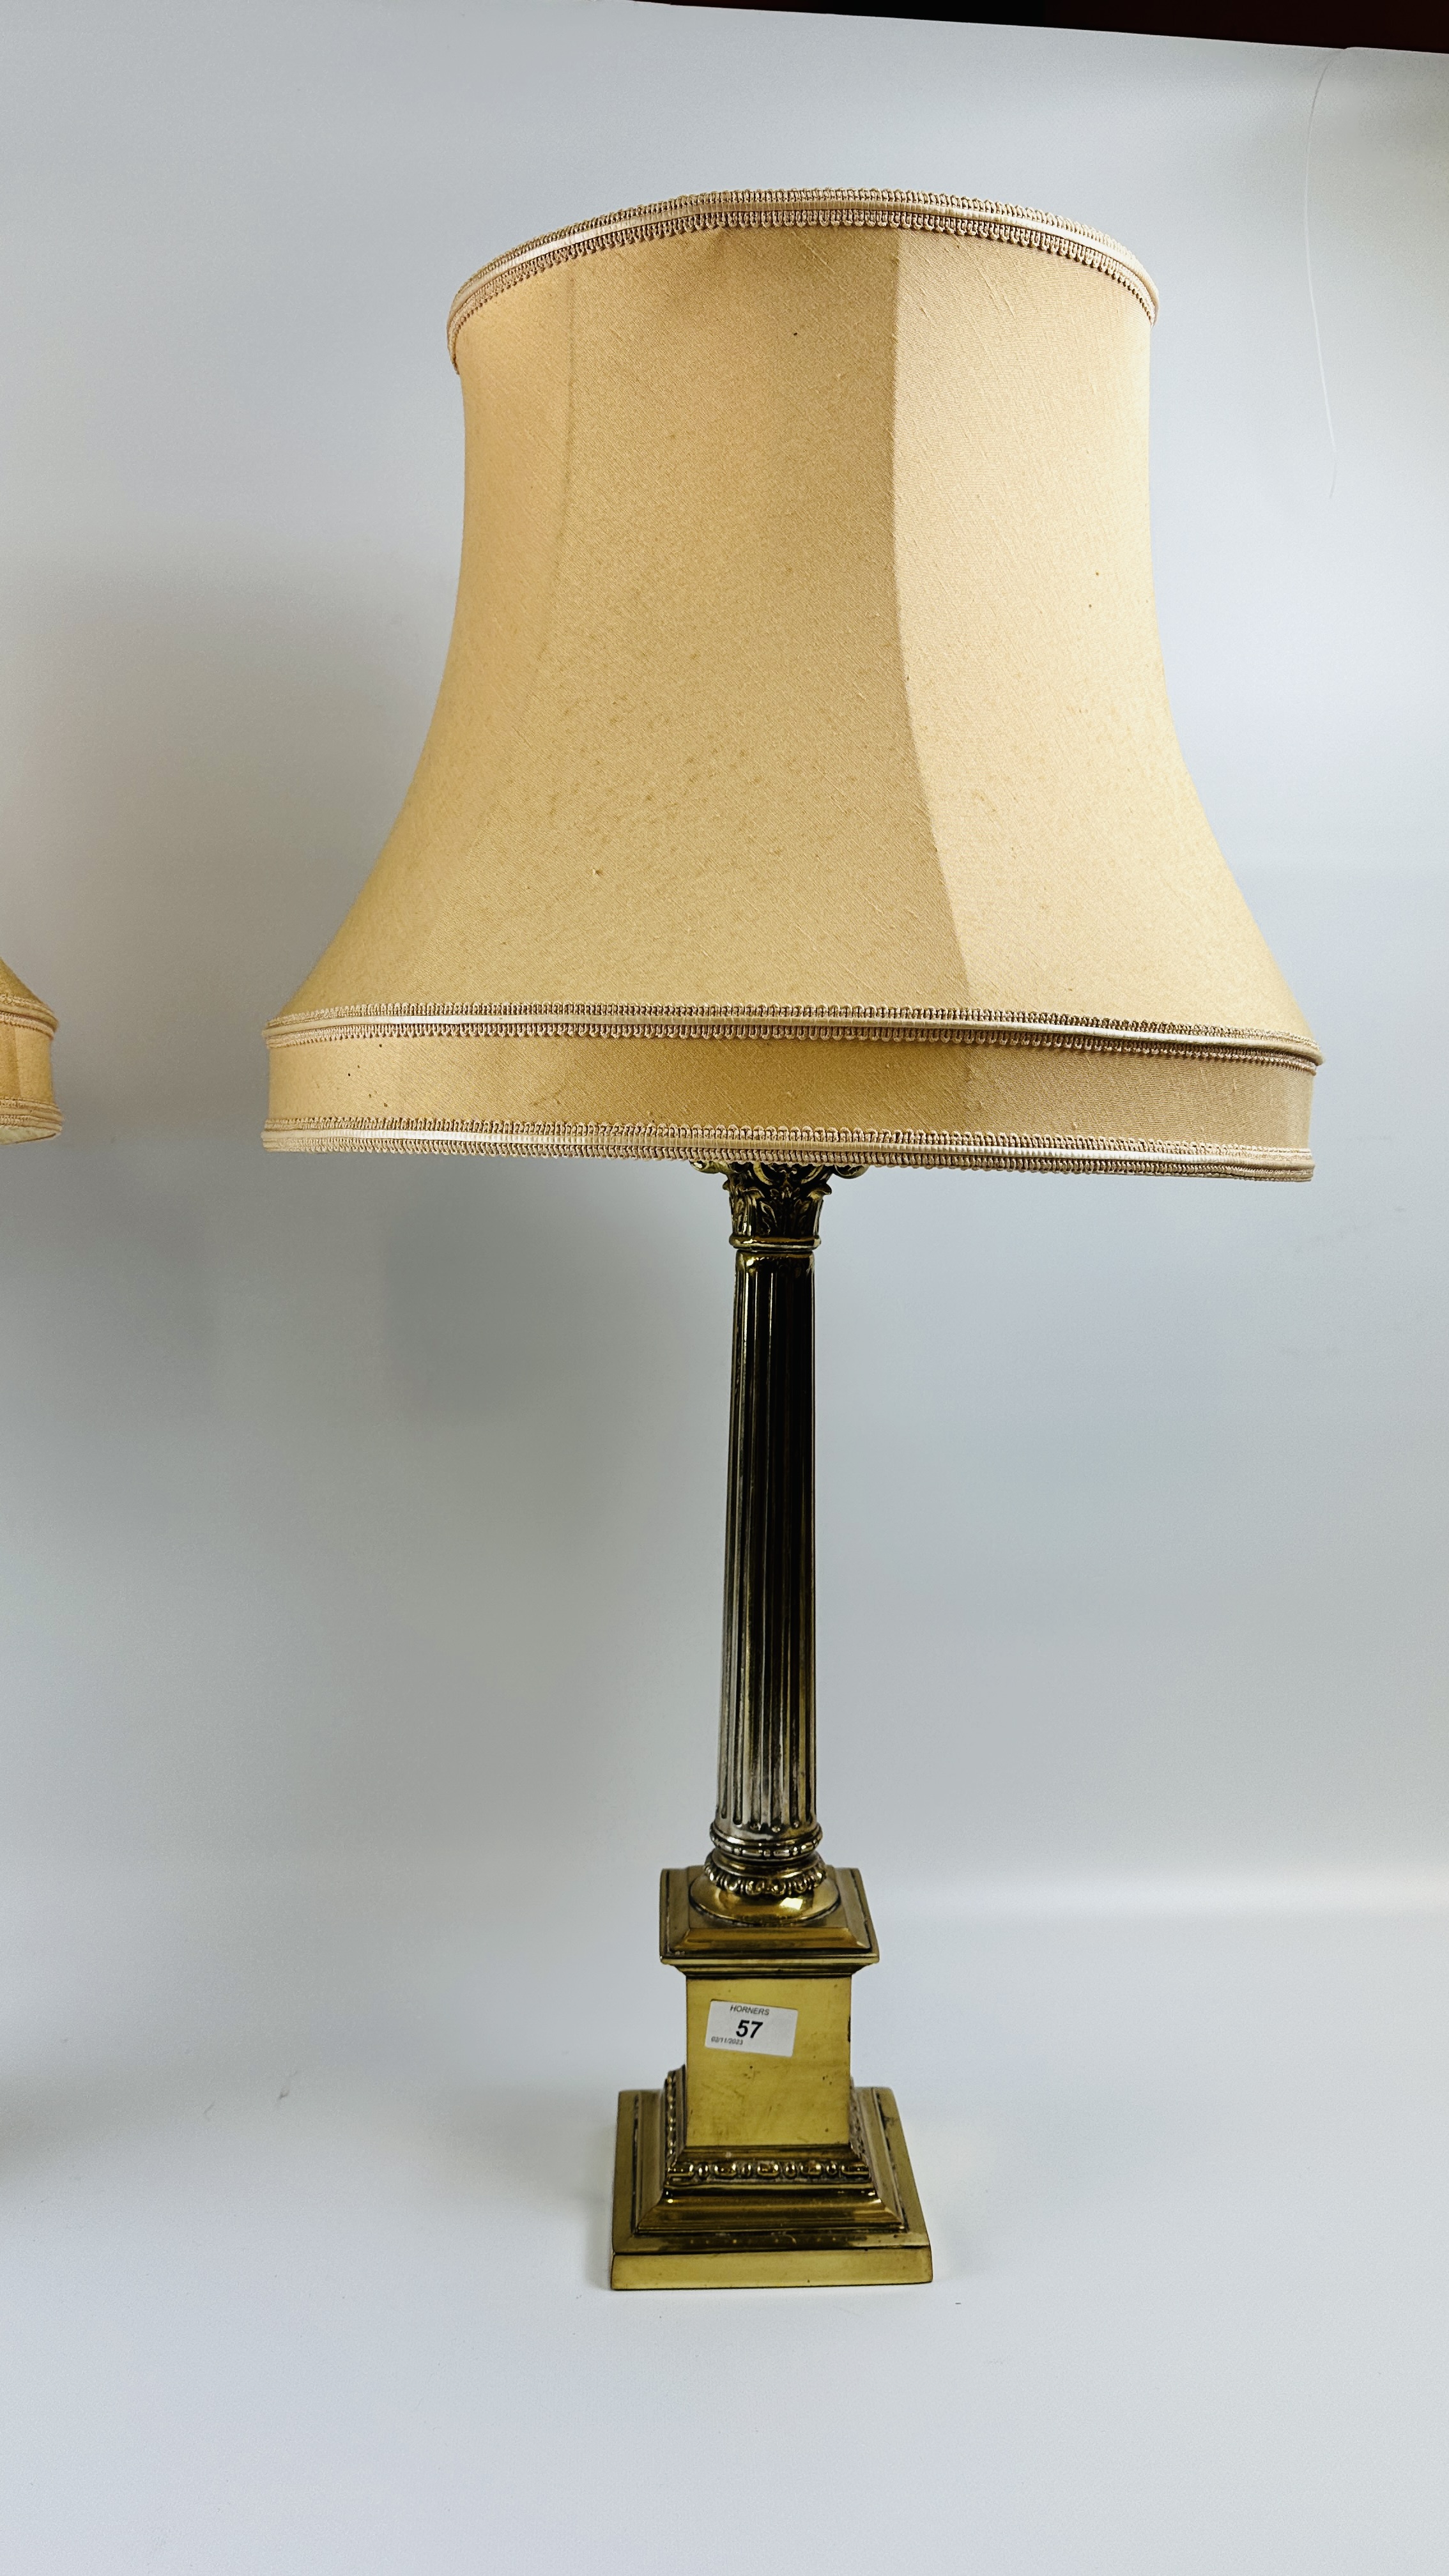 A PAIR OF HEAVY GILT FINISHED COLUMNED TABLE LAMPS - WIRES REMOVED. - Image 2 of 8